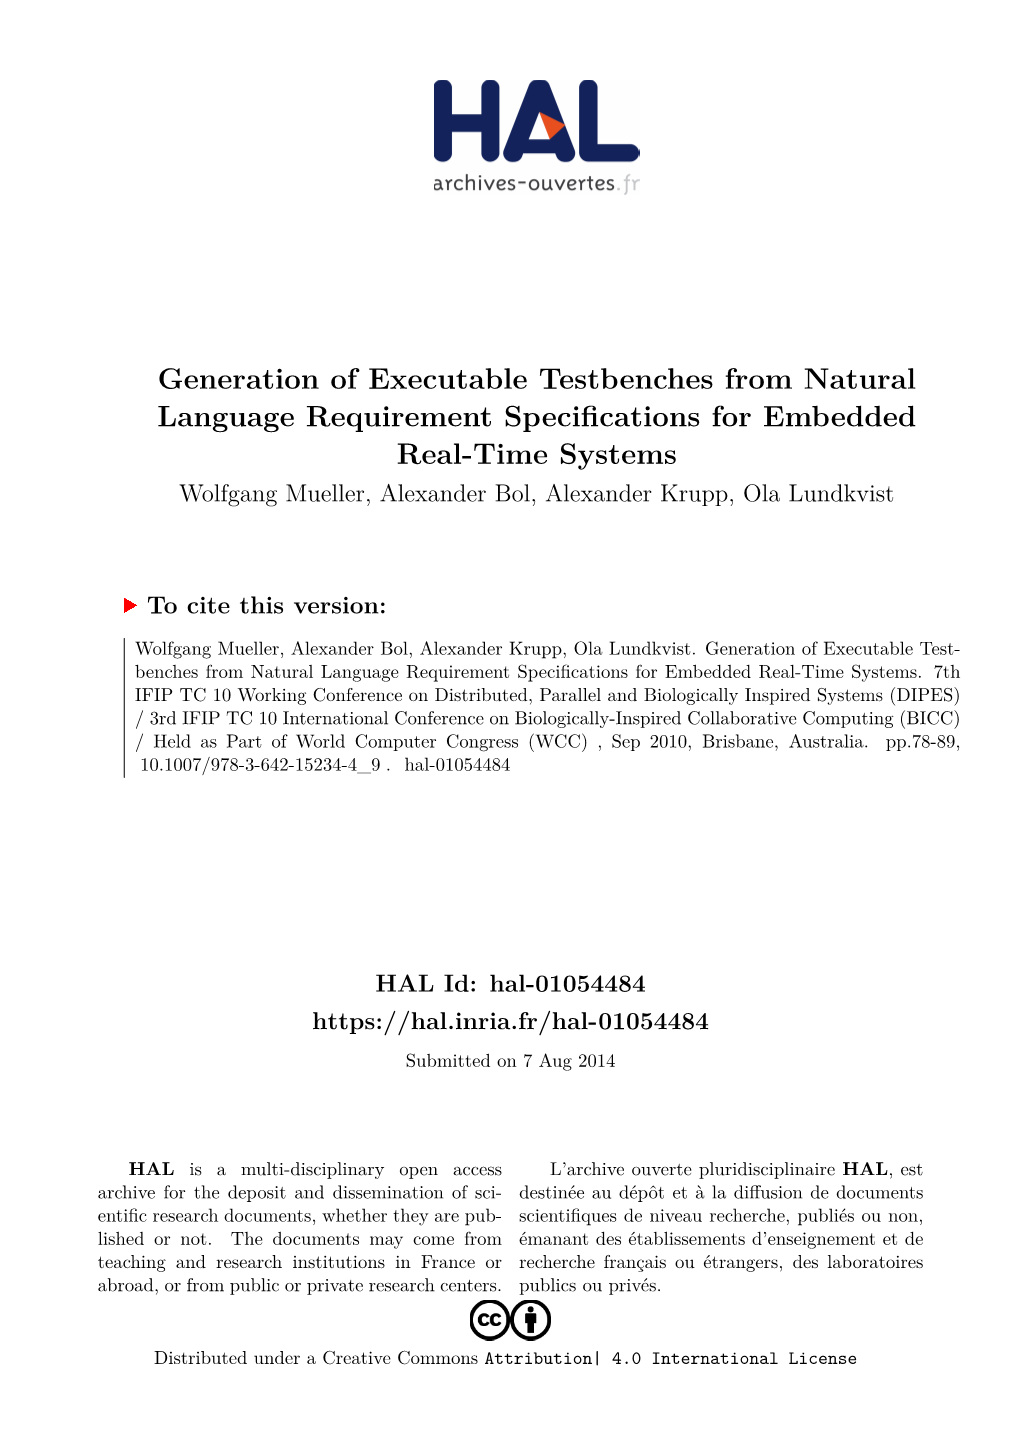 Generation of Executable Testbenches from Natural Language Requirement Specifications for Embedded Real-Time Systems